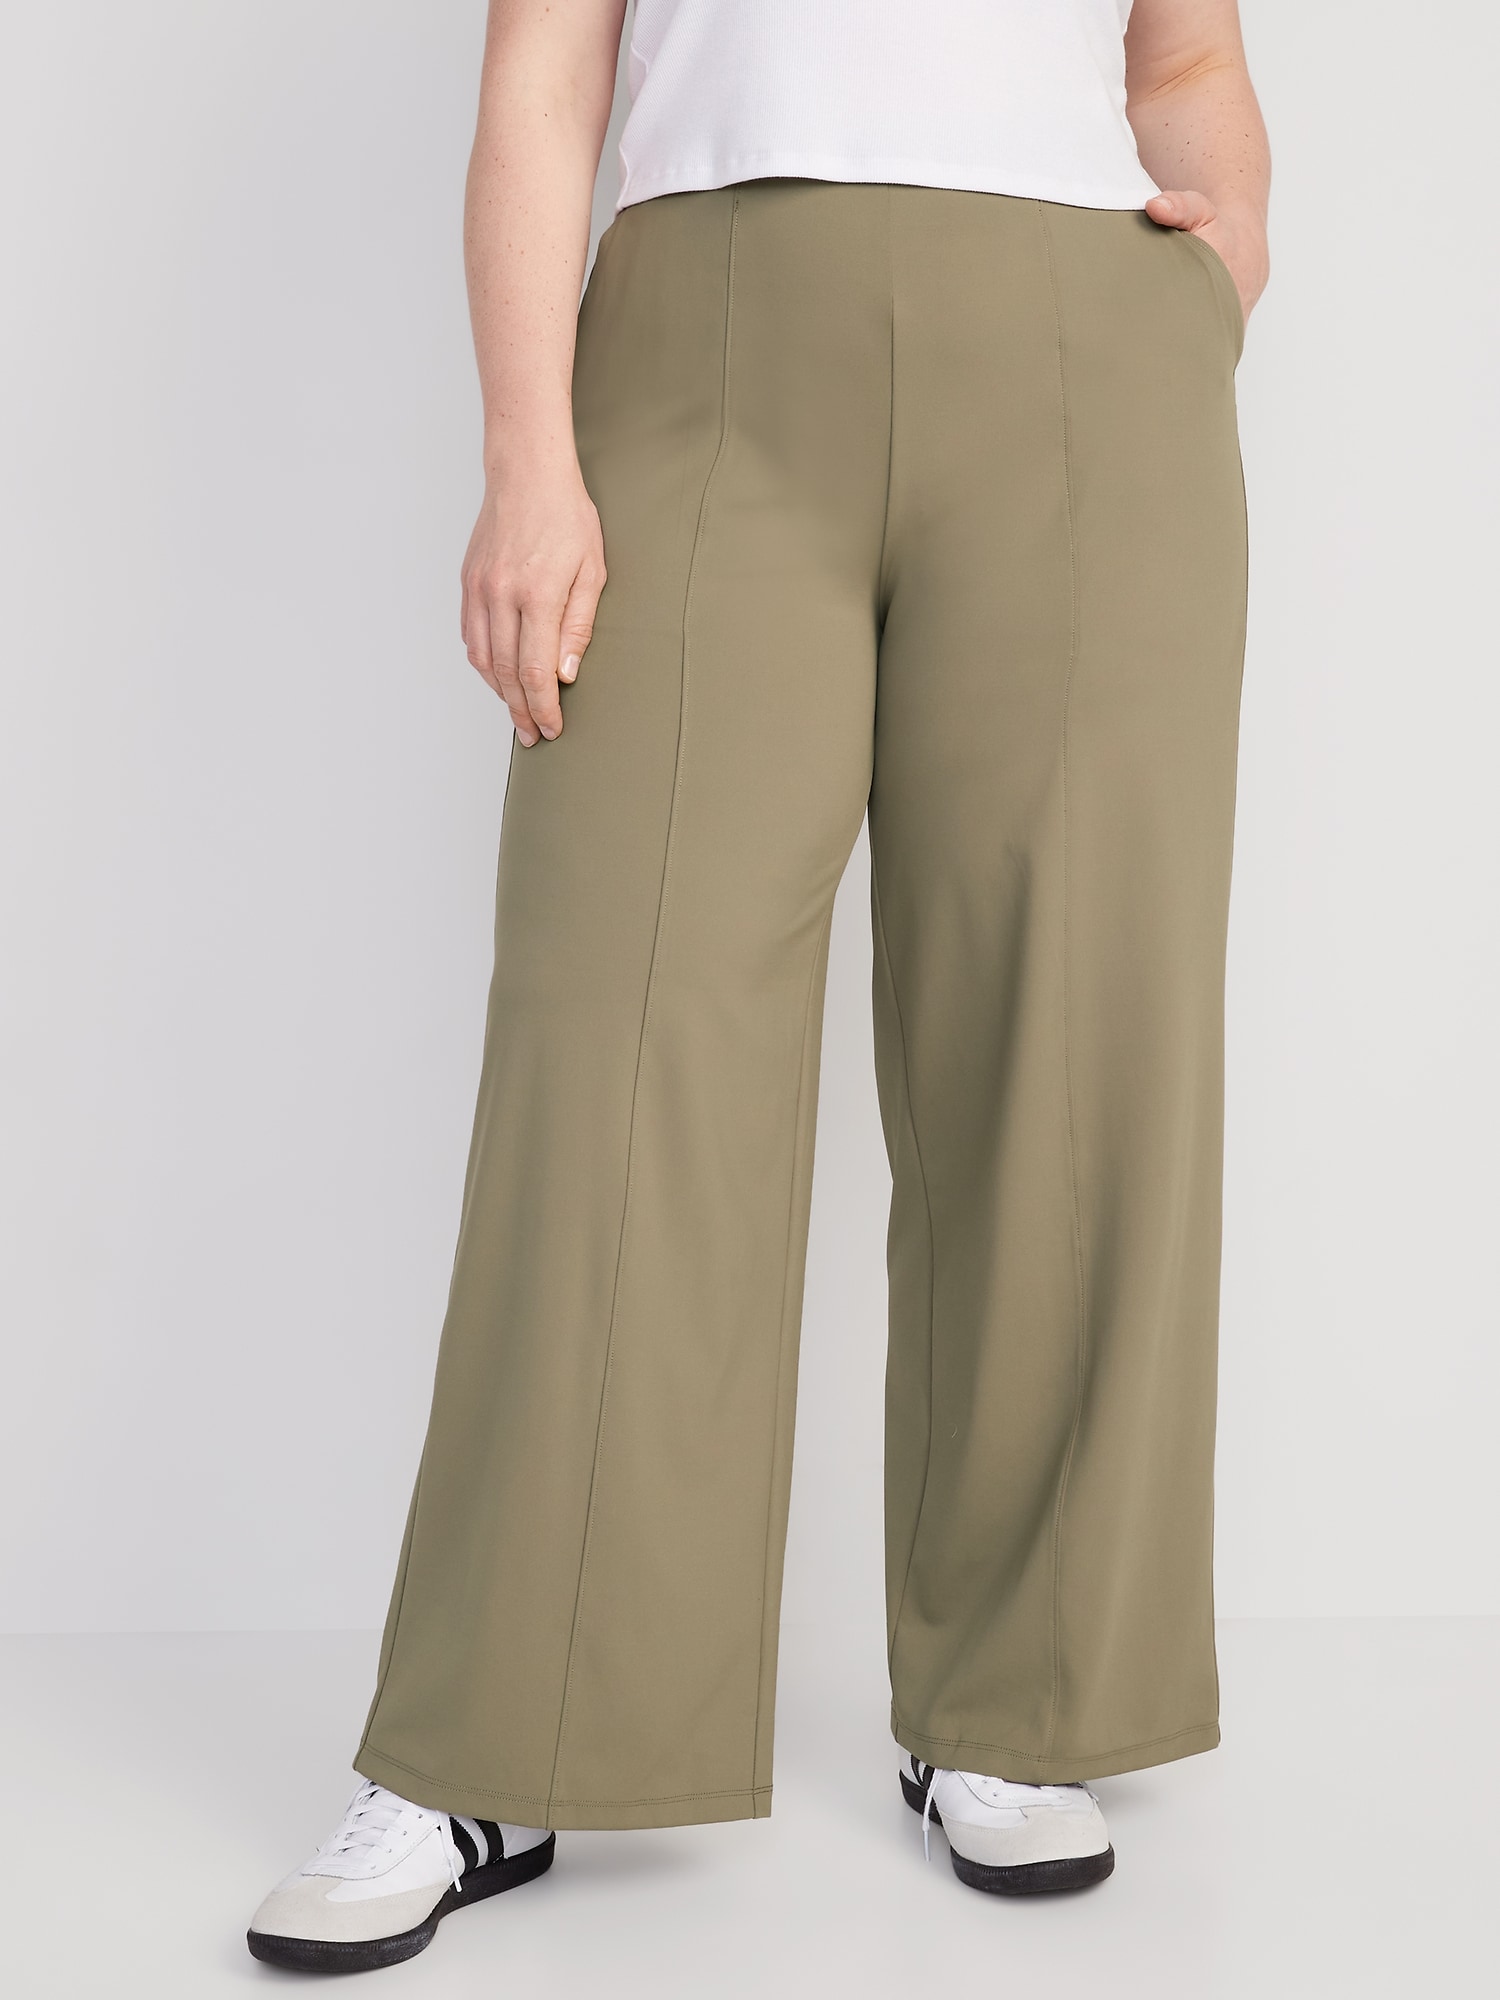 High-Waisted PowerSoft Wide-Leg Pants for Women | Old Navy